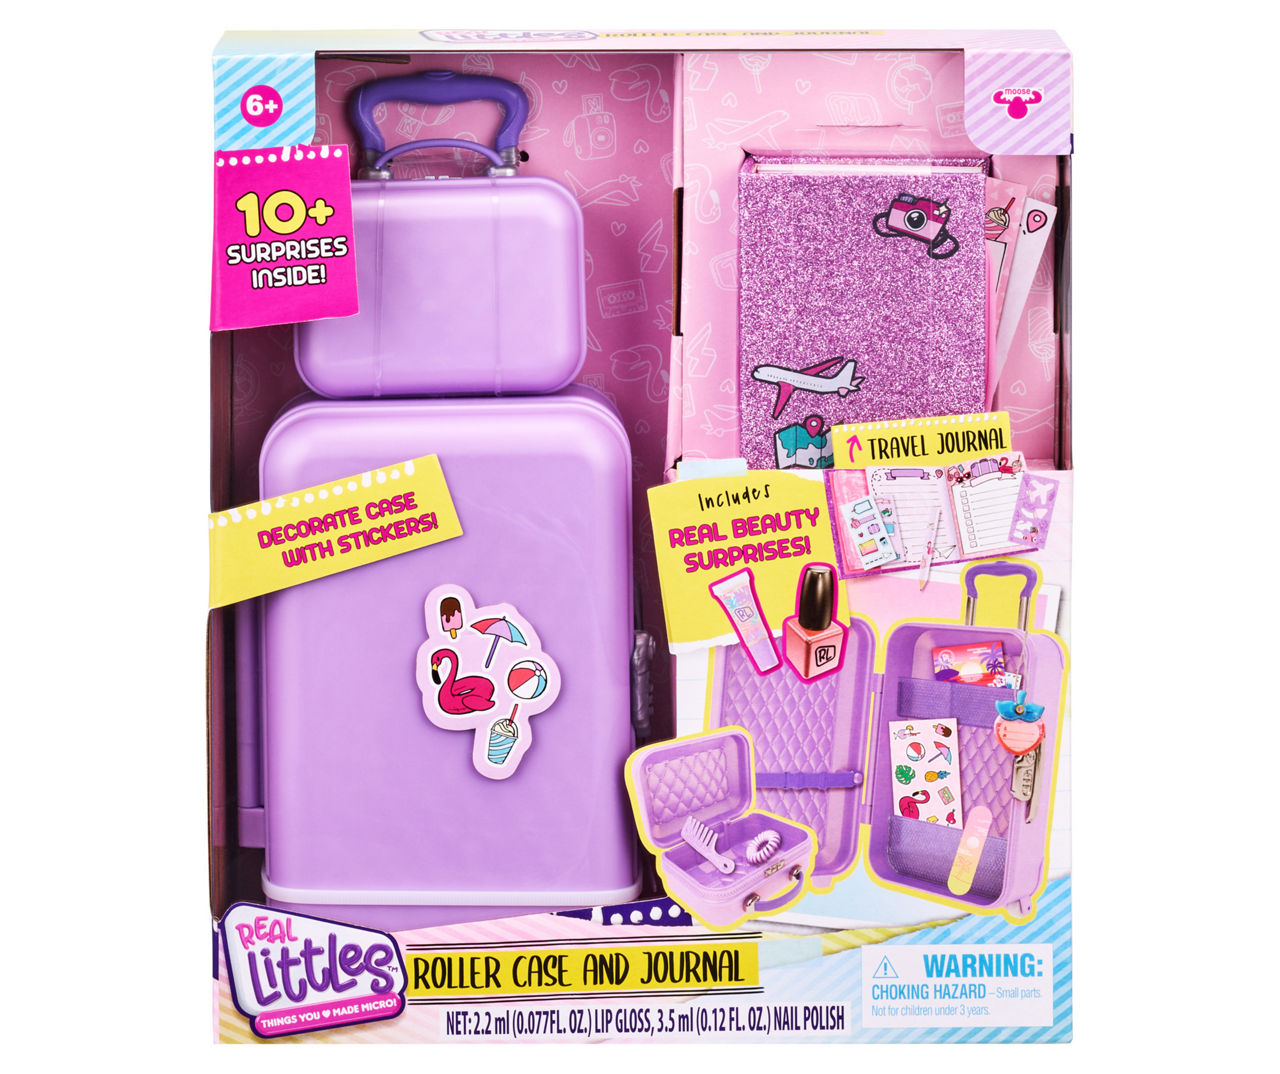 AHHH these Real Littles Micro Craft kits by Moose Toys are so cute